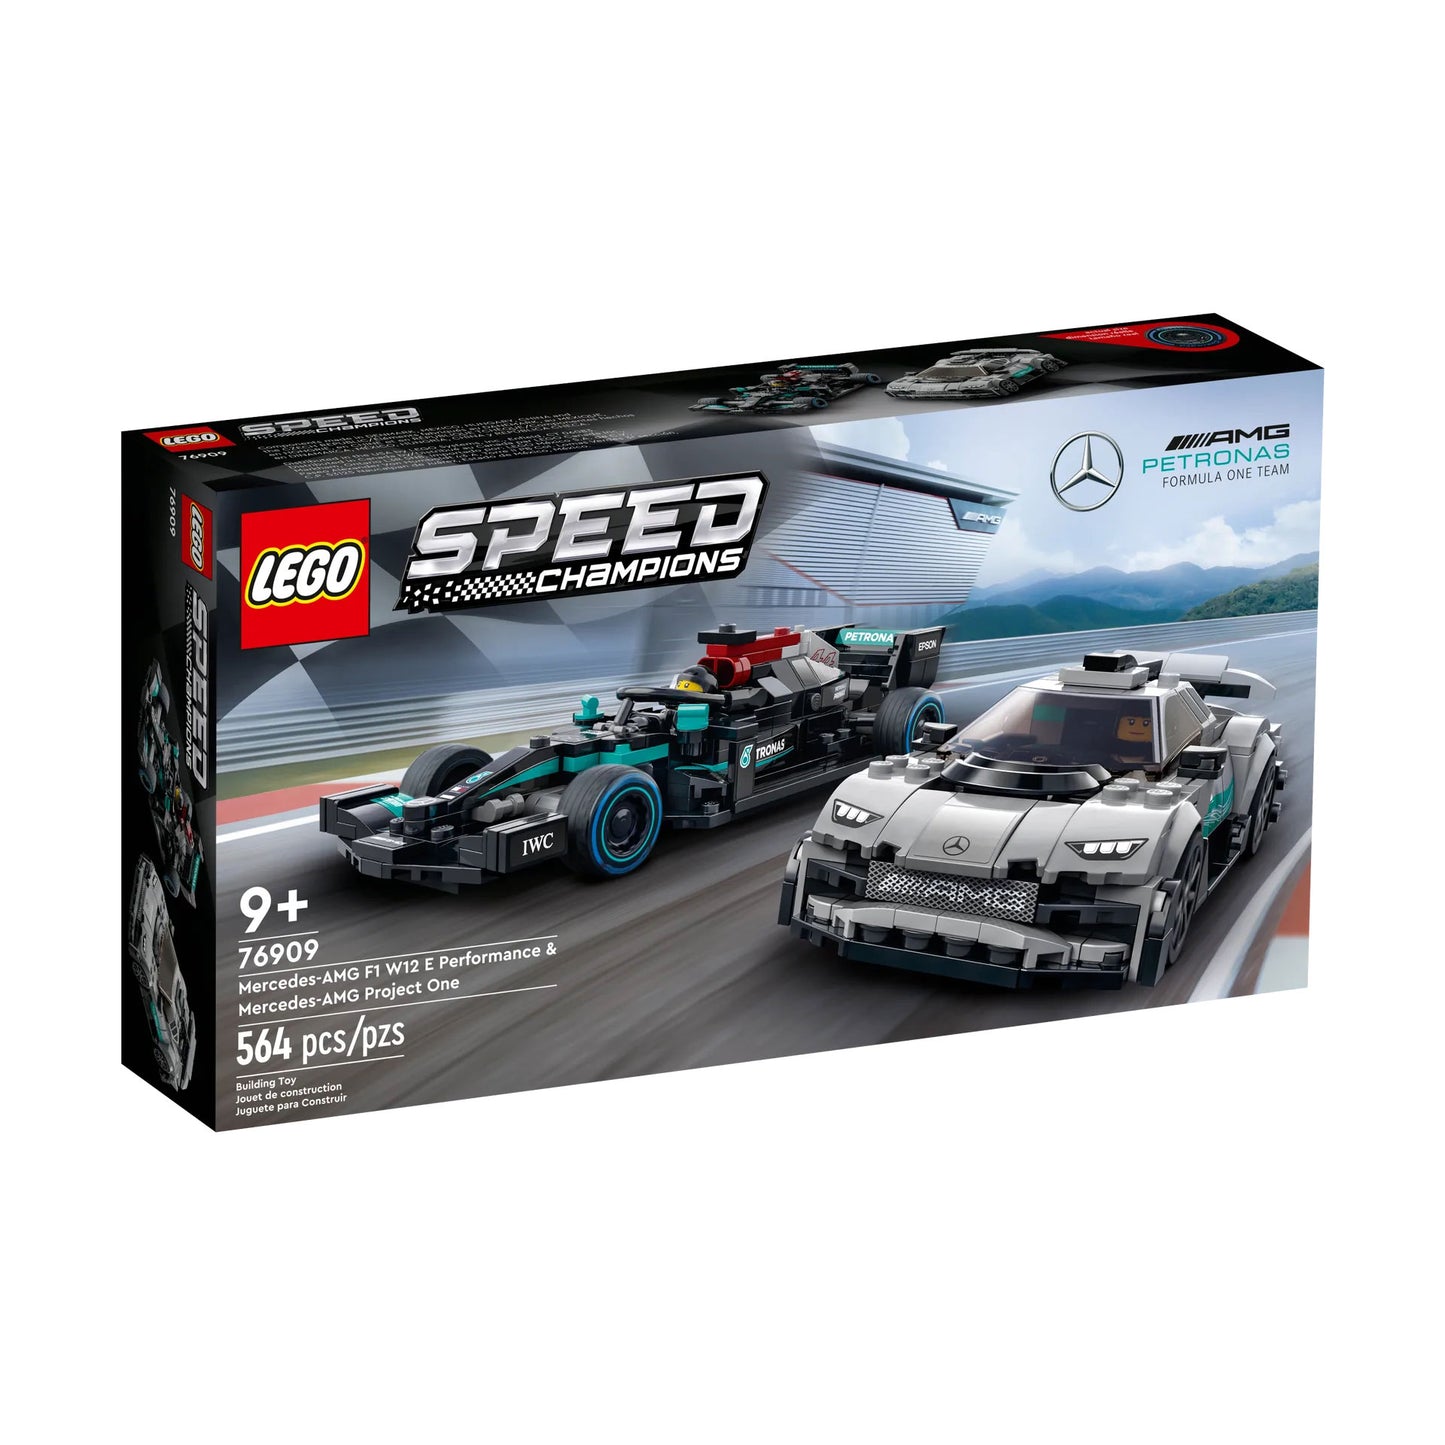 LEGO Mercedes-AMG F1 W12 E Performance & Project One